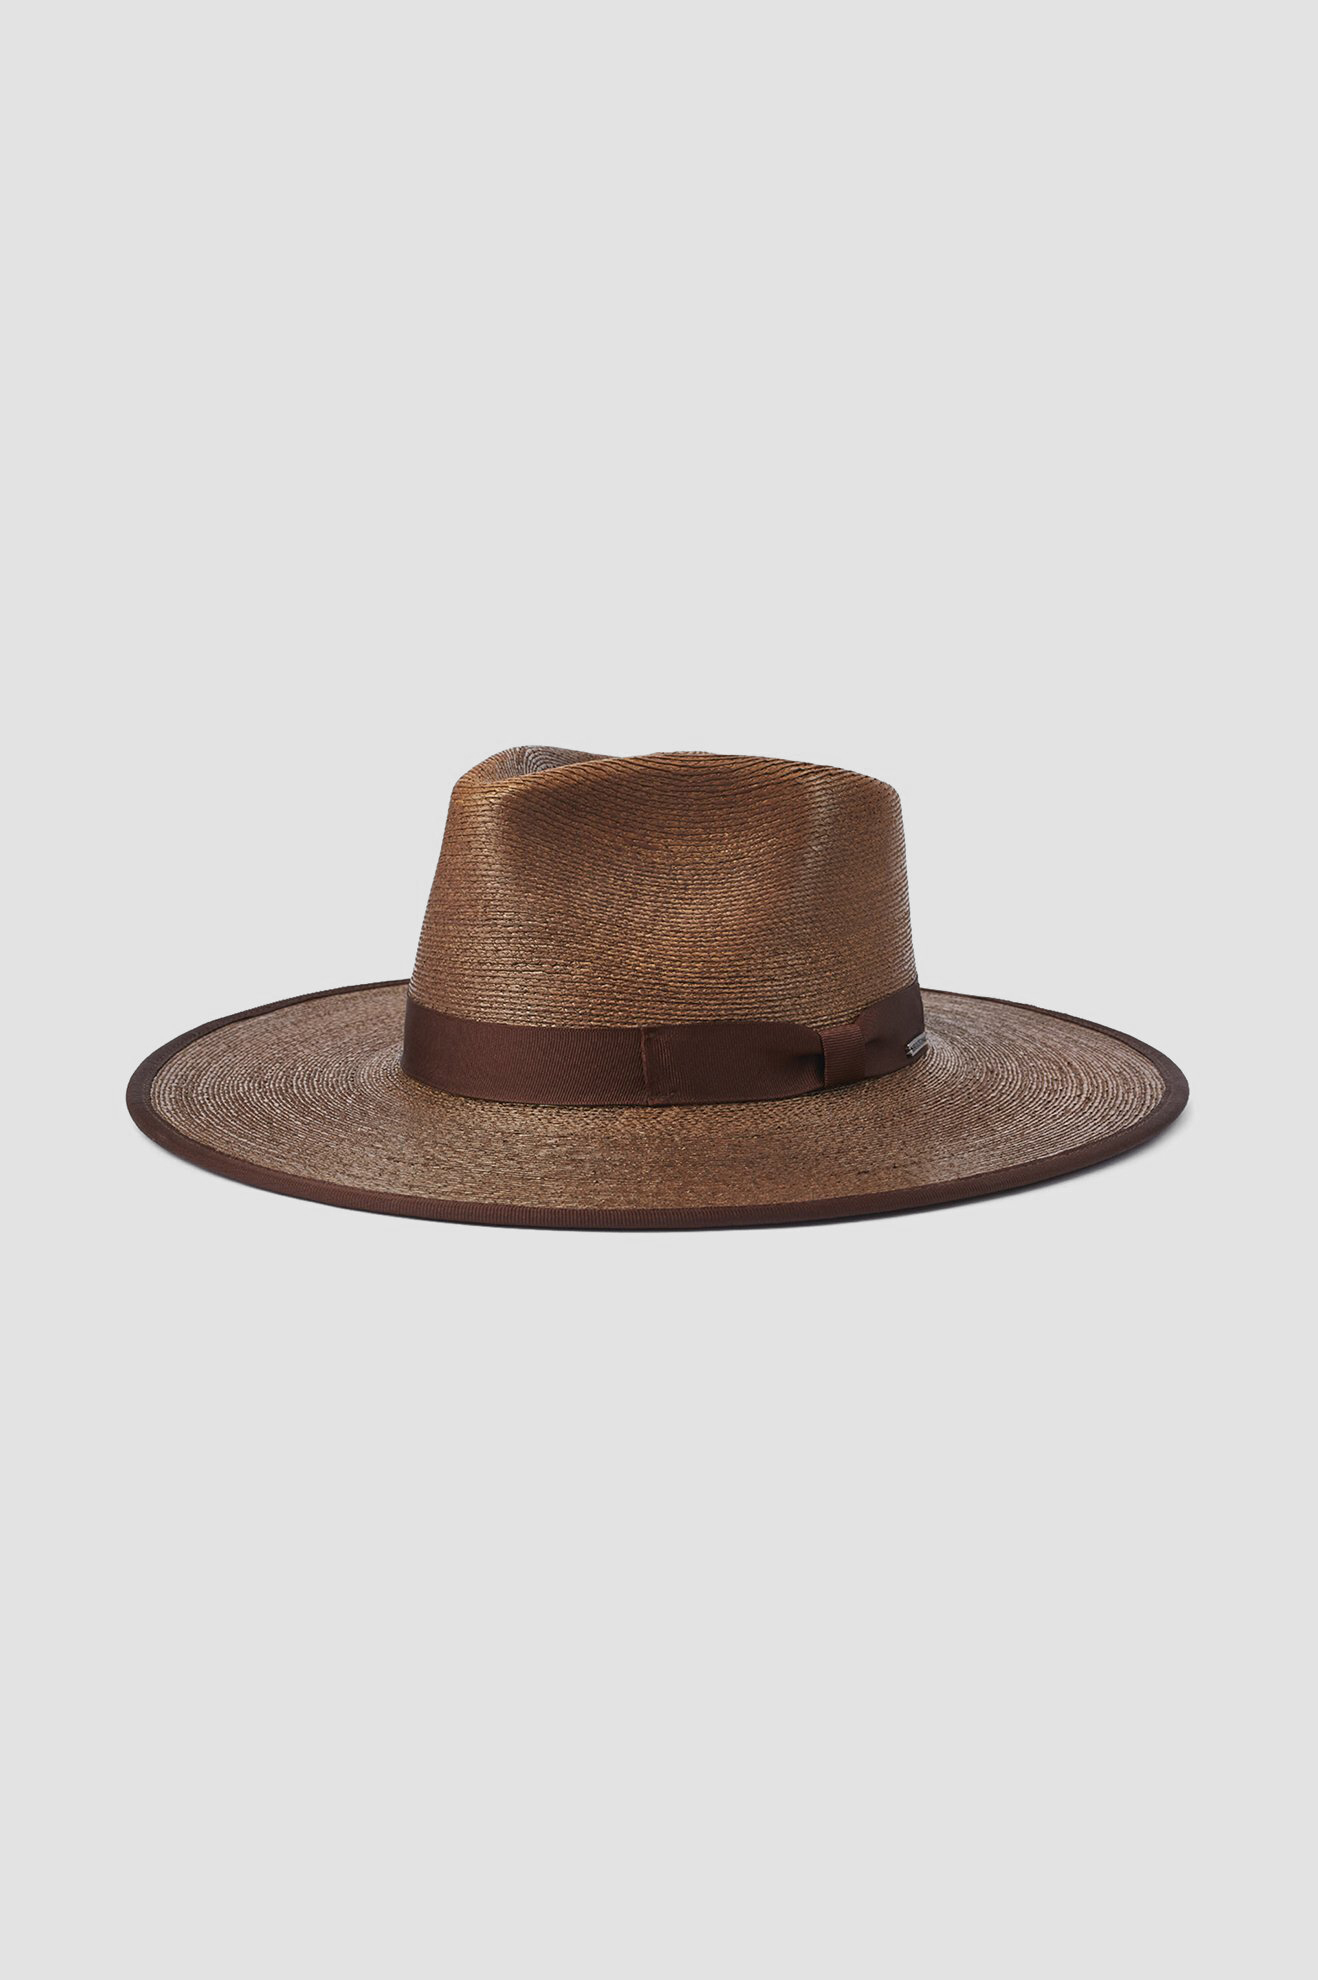 Brixton - Jo Straw Rancher Hat in Brown - M, BRN1, hi-res image number null